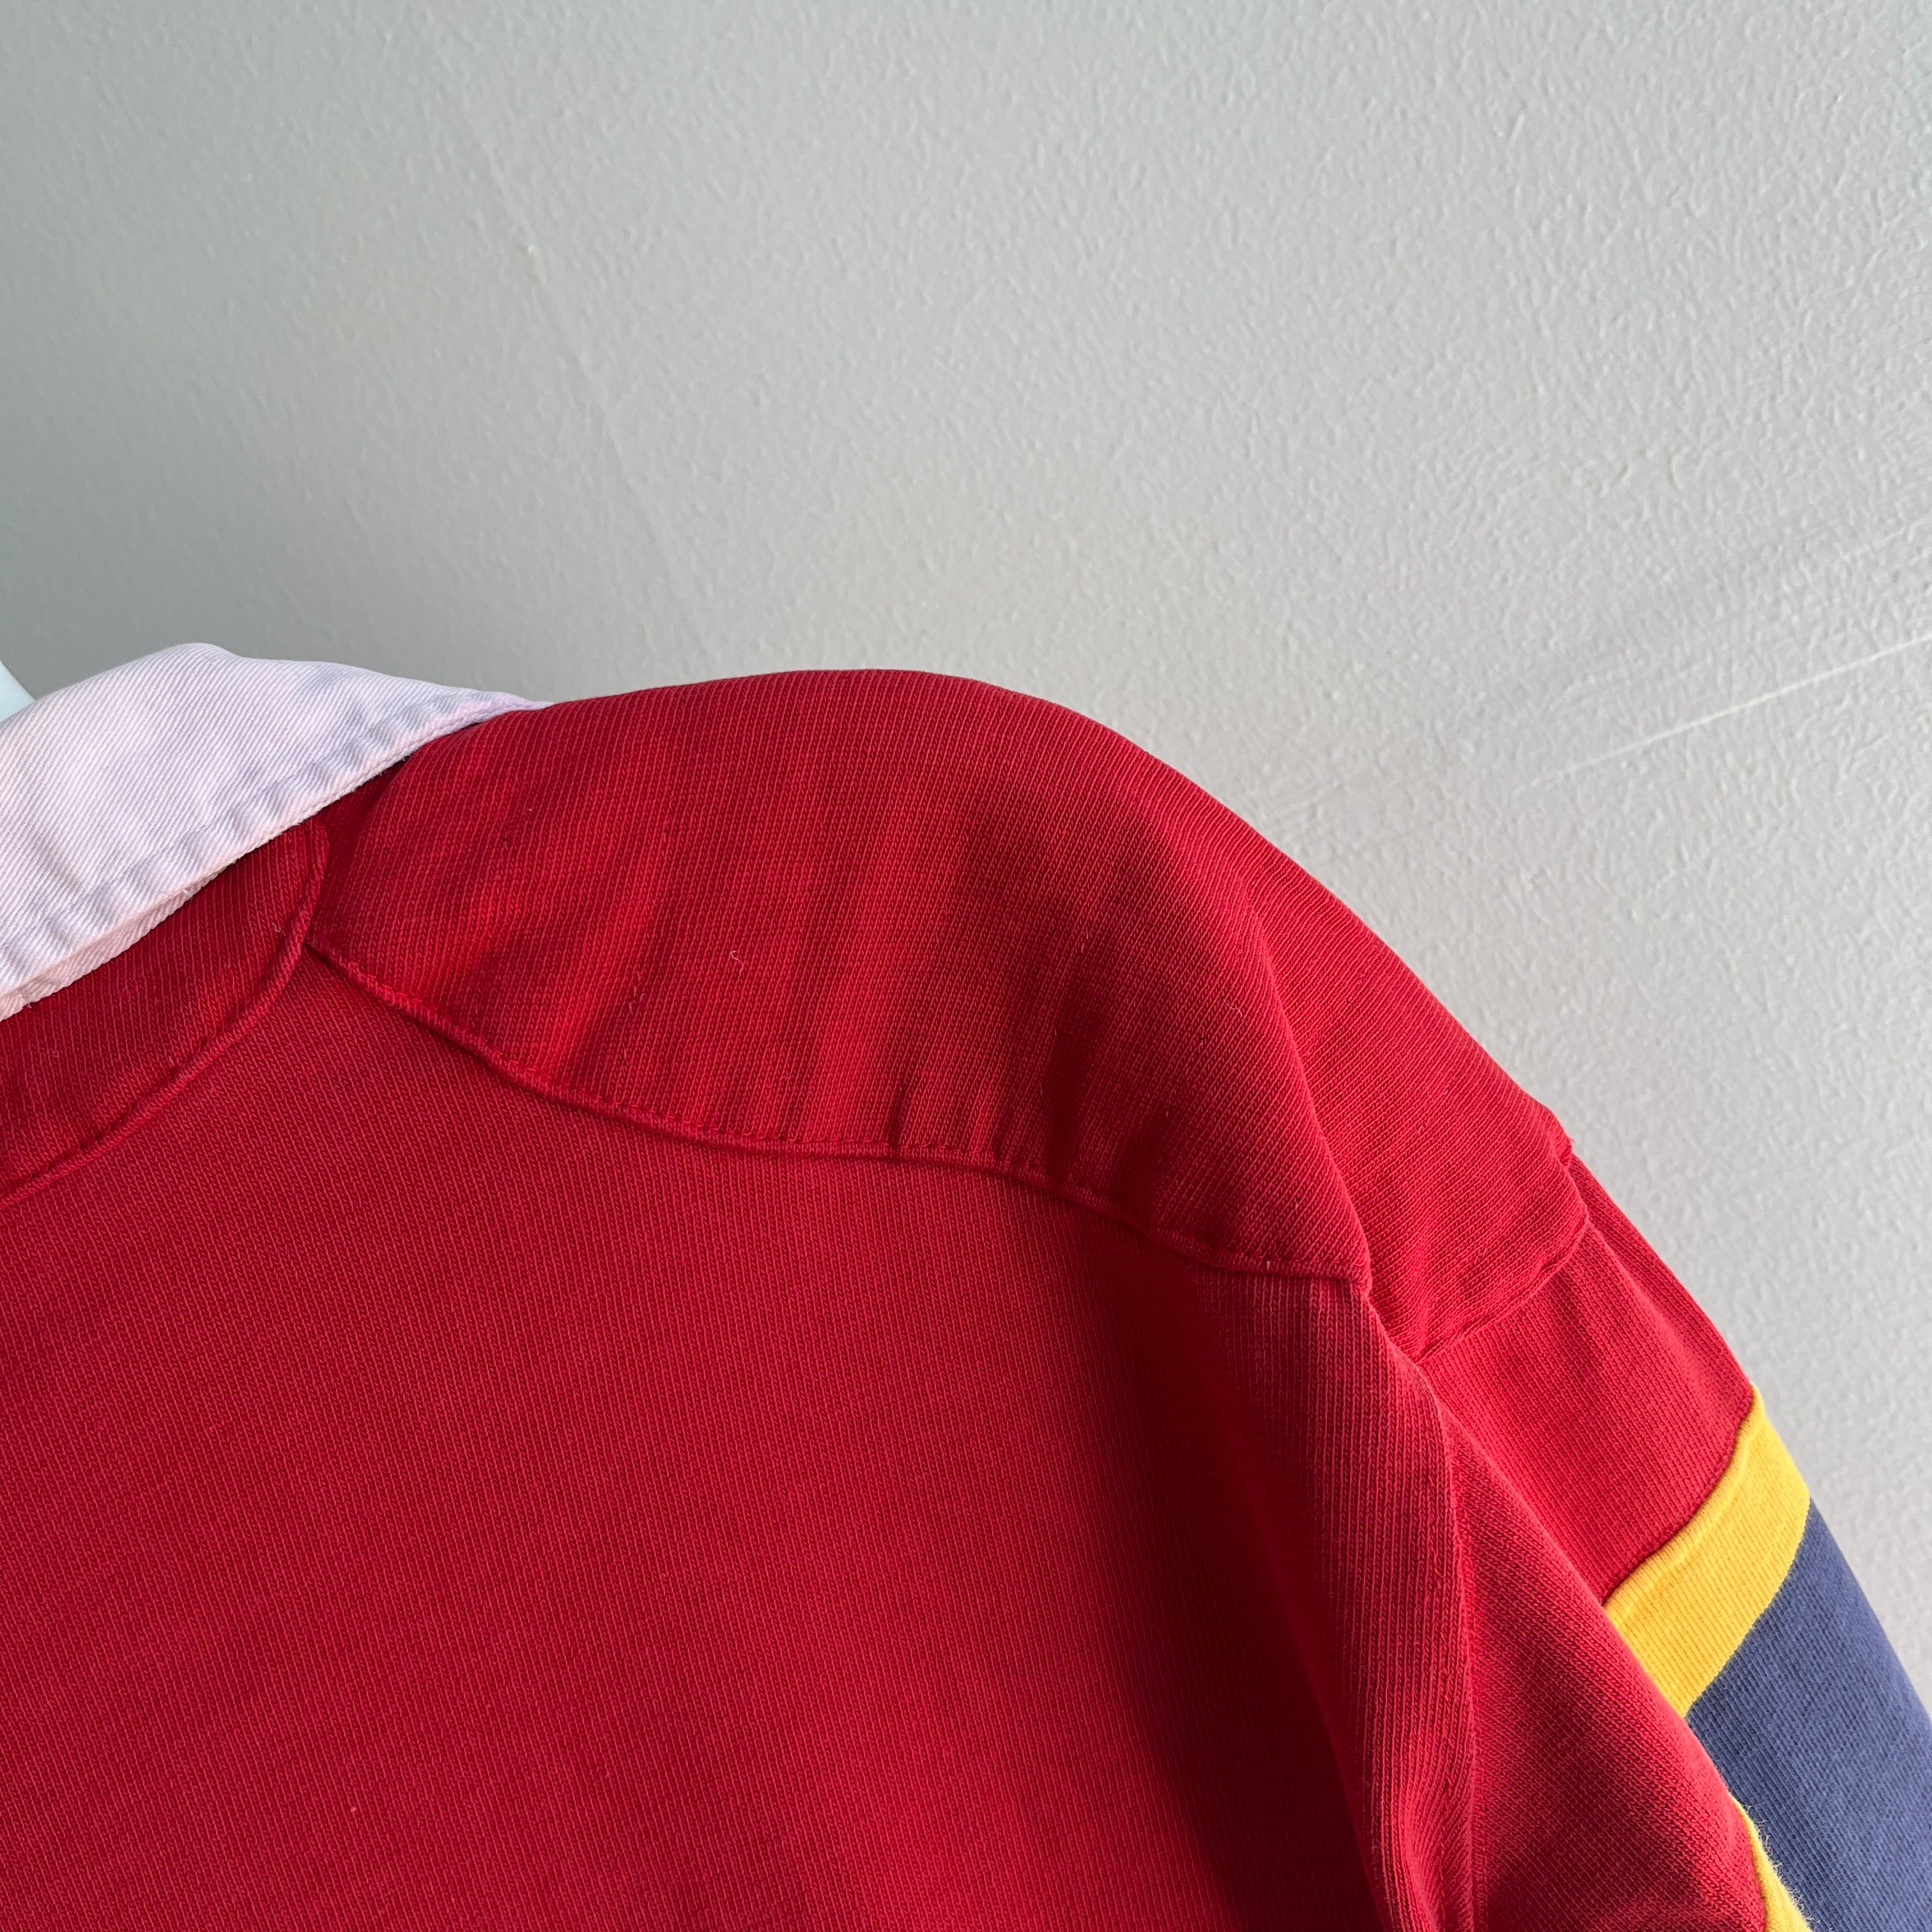 1980/90s USA Made Ralph Lauren Rugby Shirt - With Staining